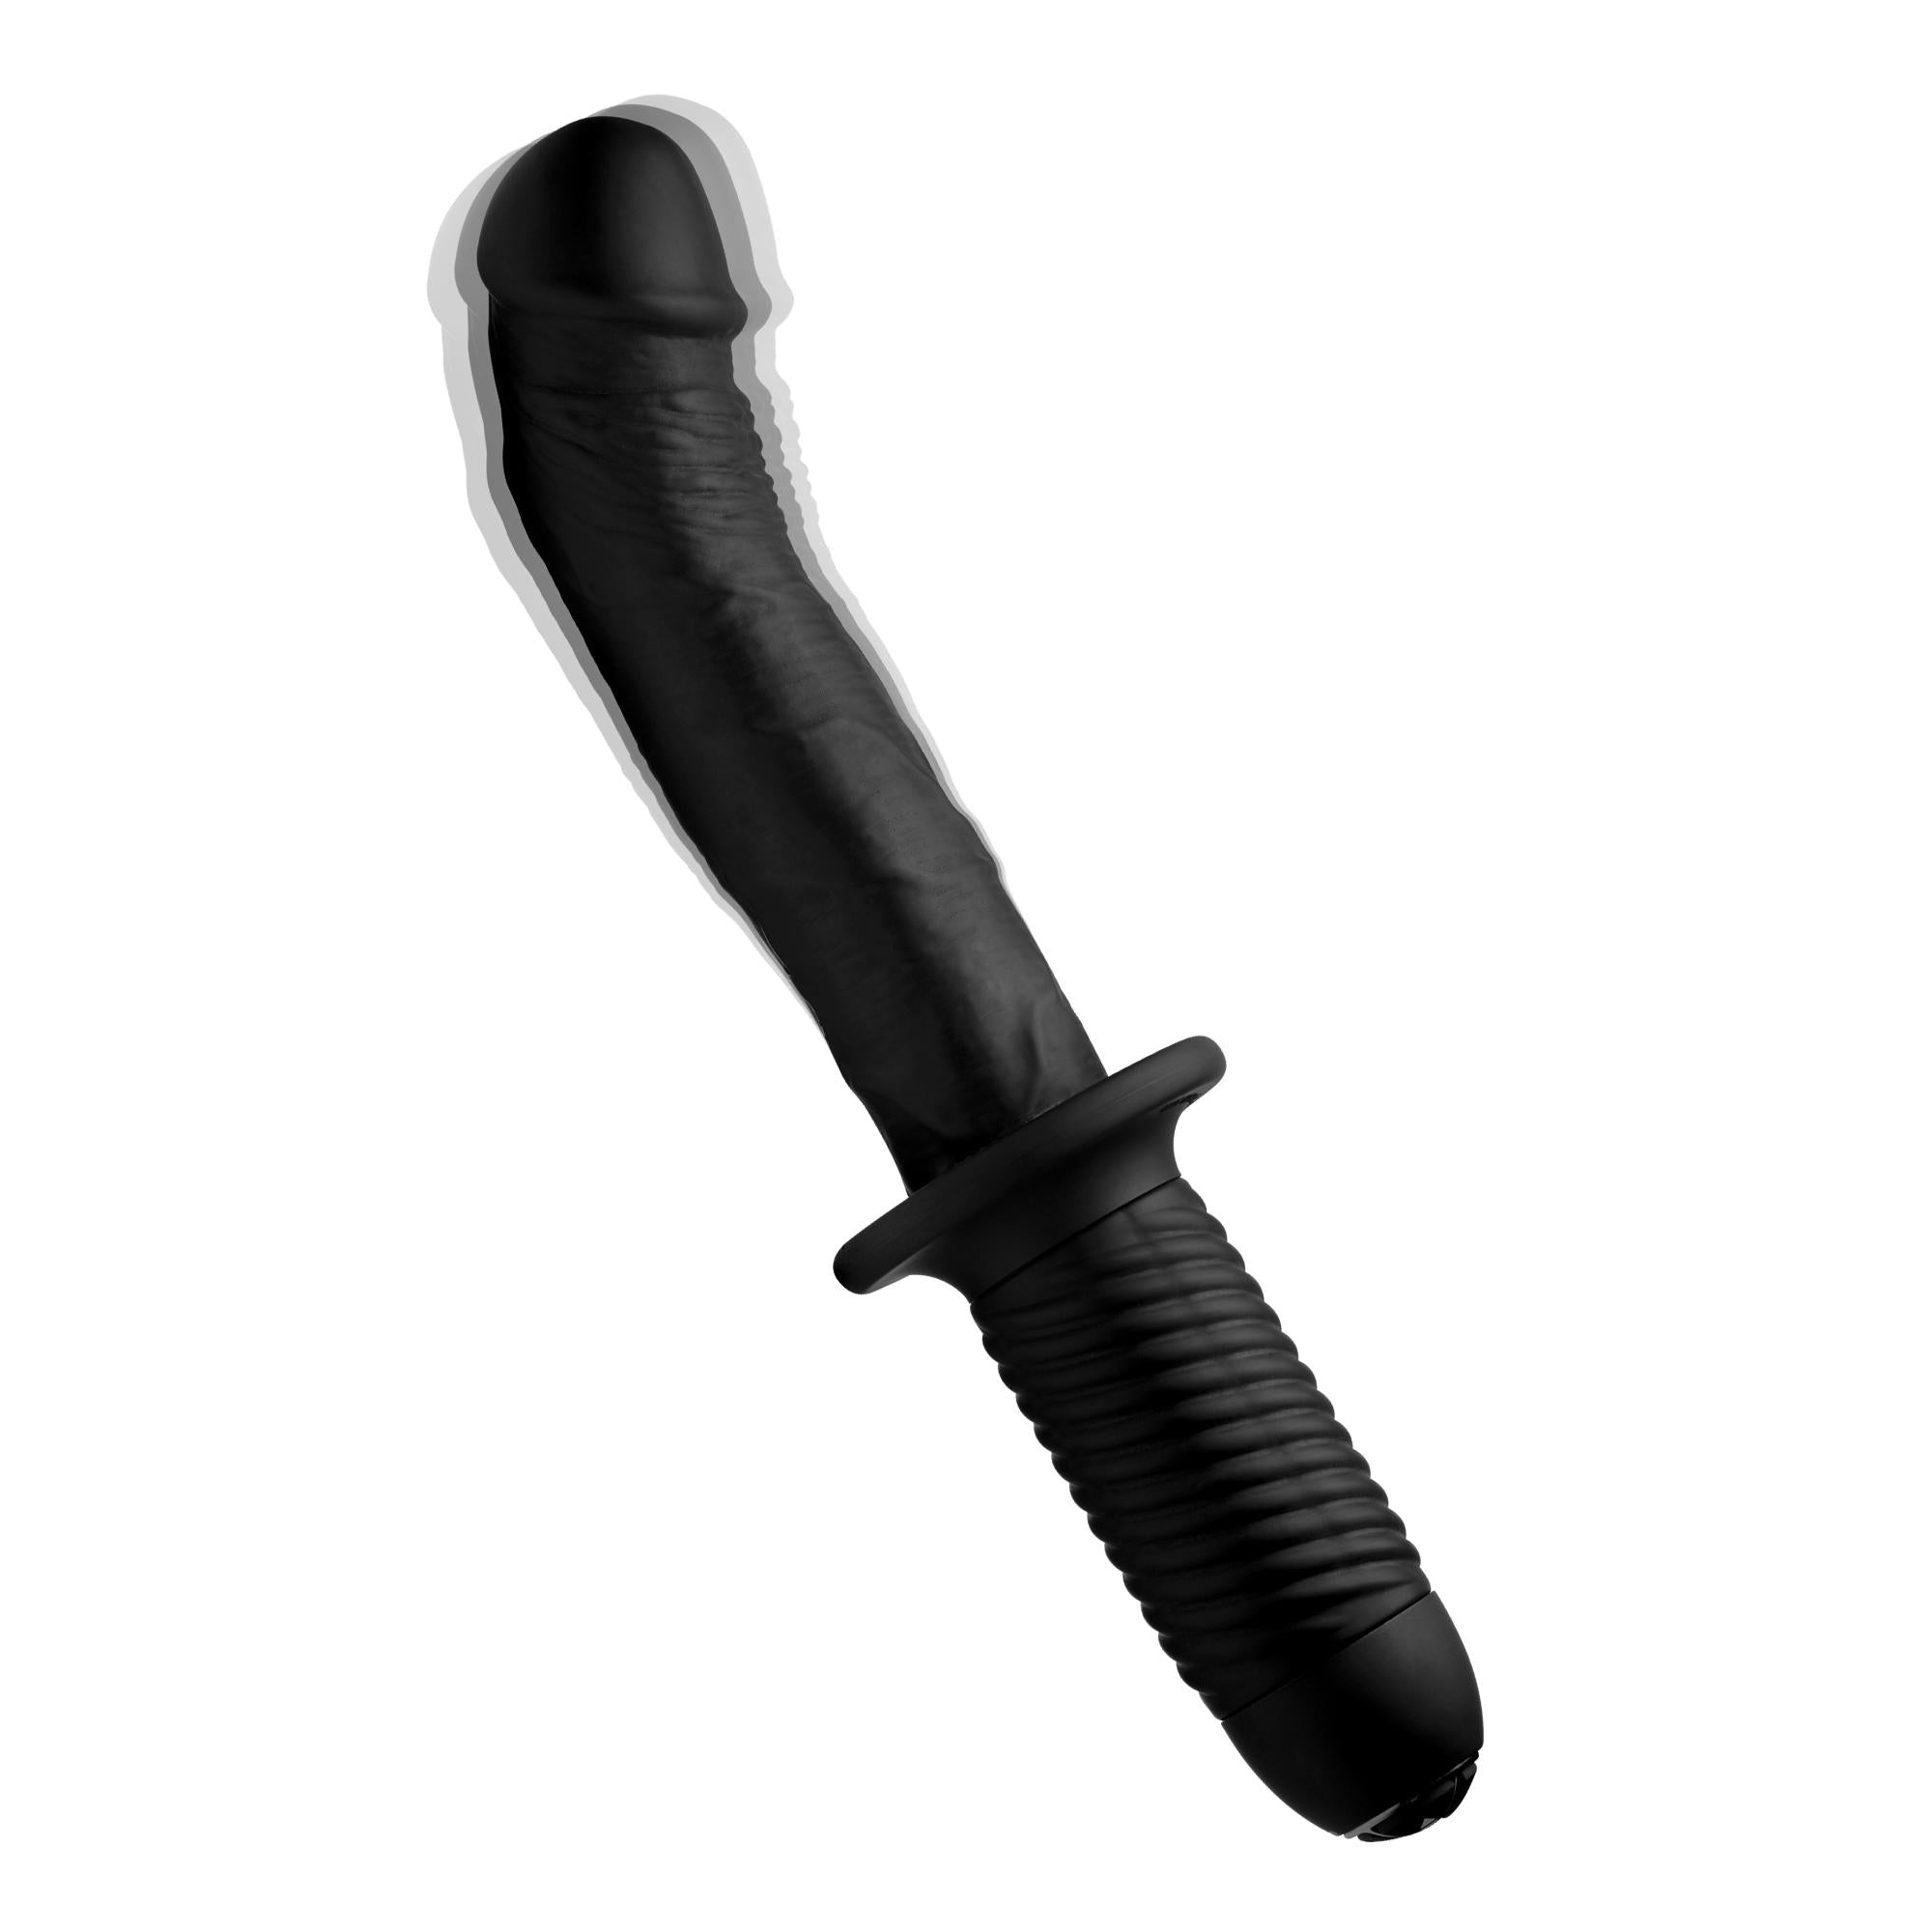 Ass Thumpers The Large Realistic 10X Silicone Vibrator with Handle